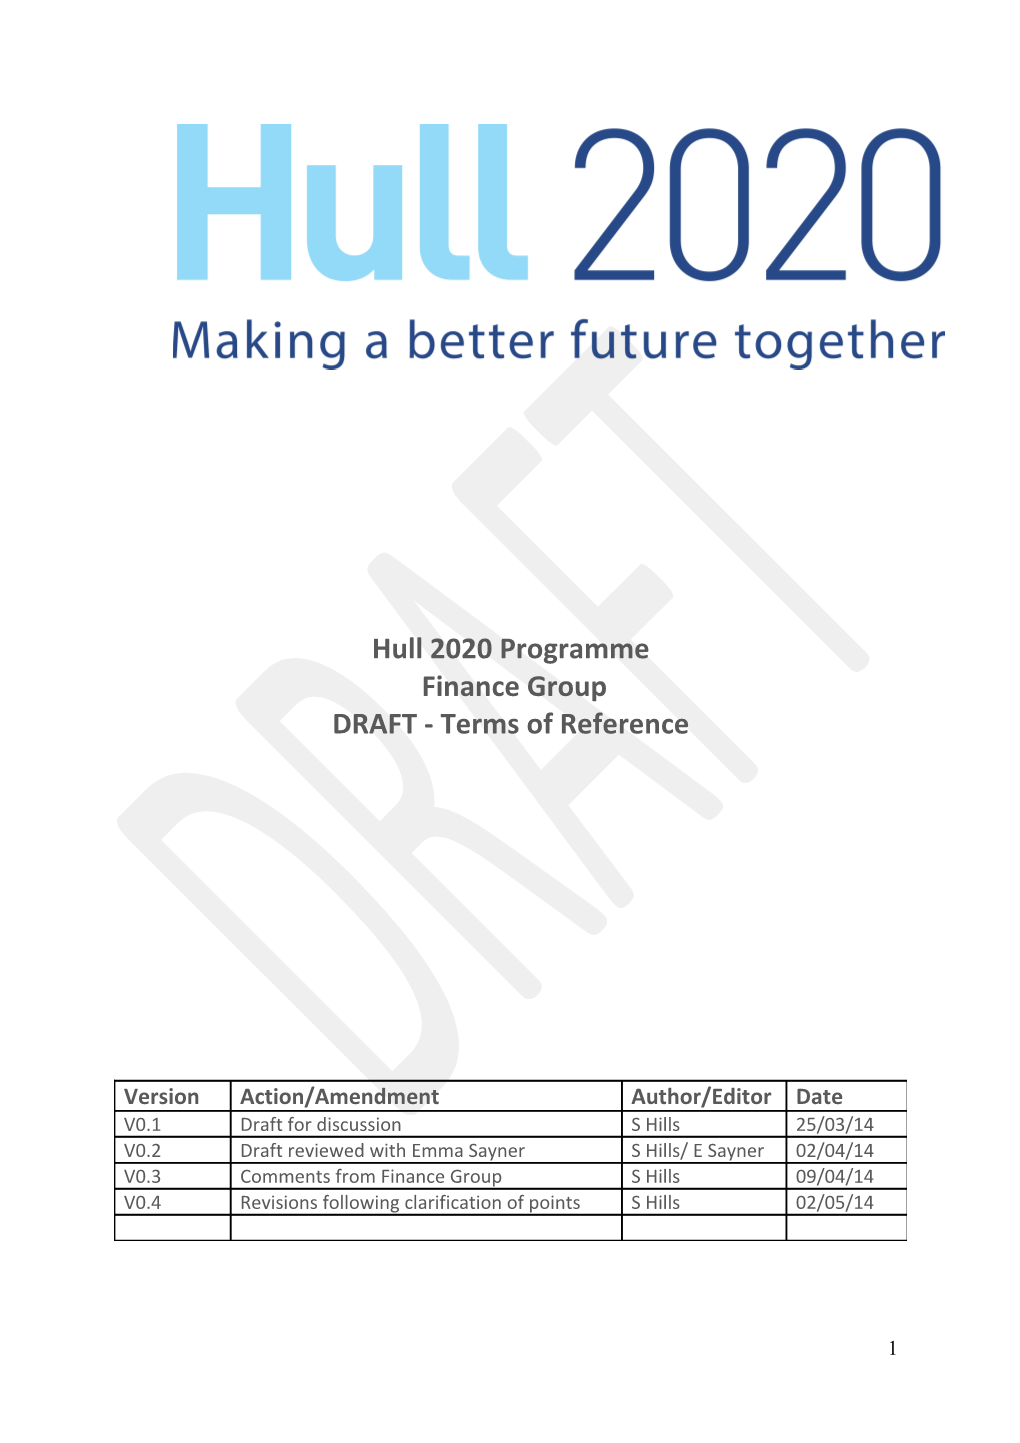 Hull 2020 Finance Group Terms of Reference